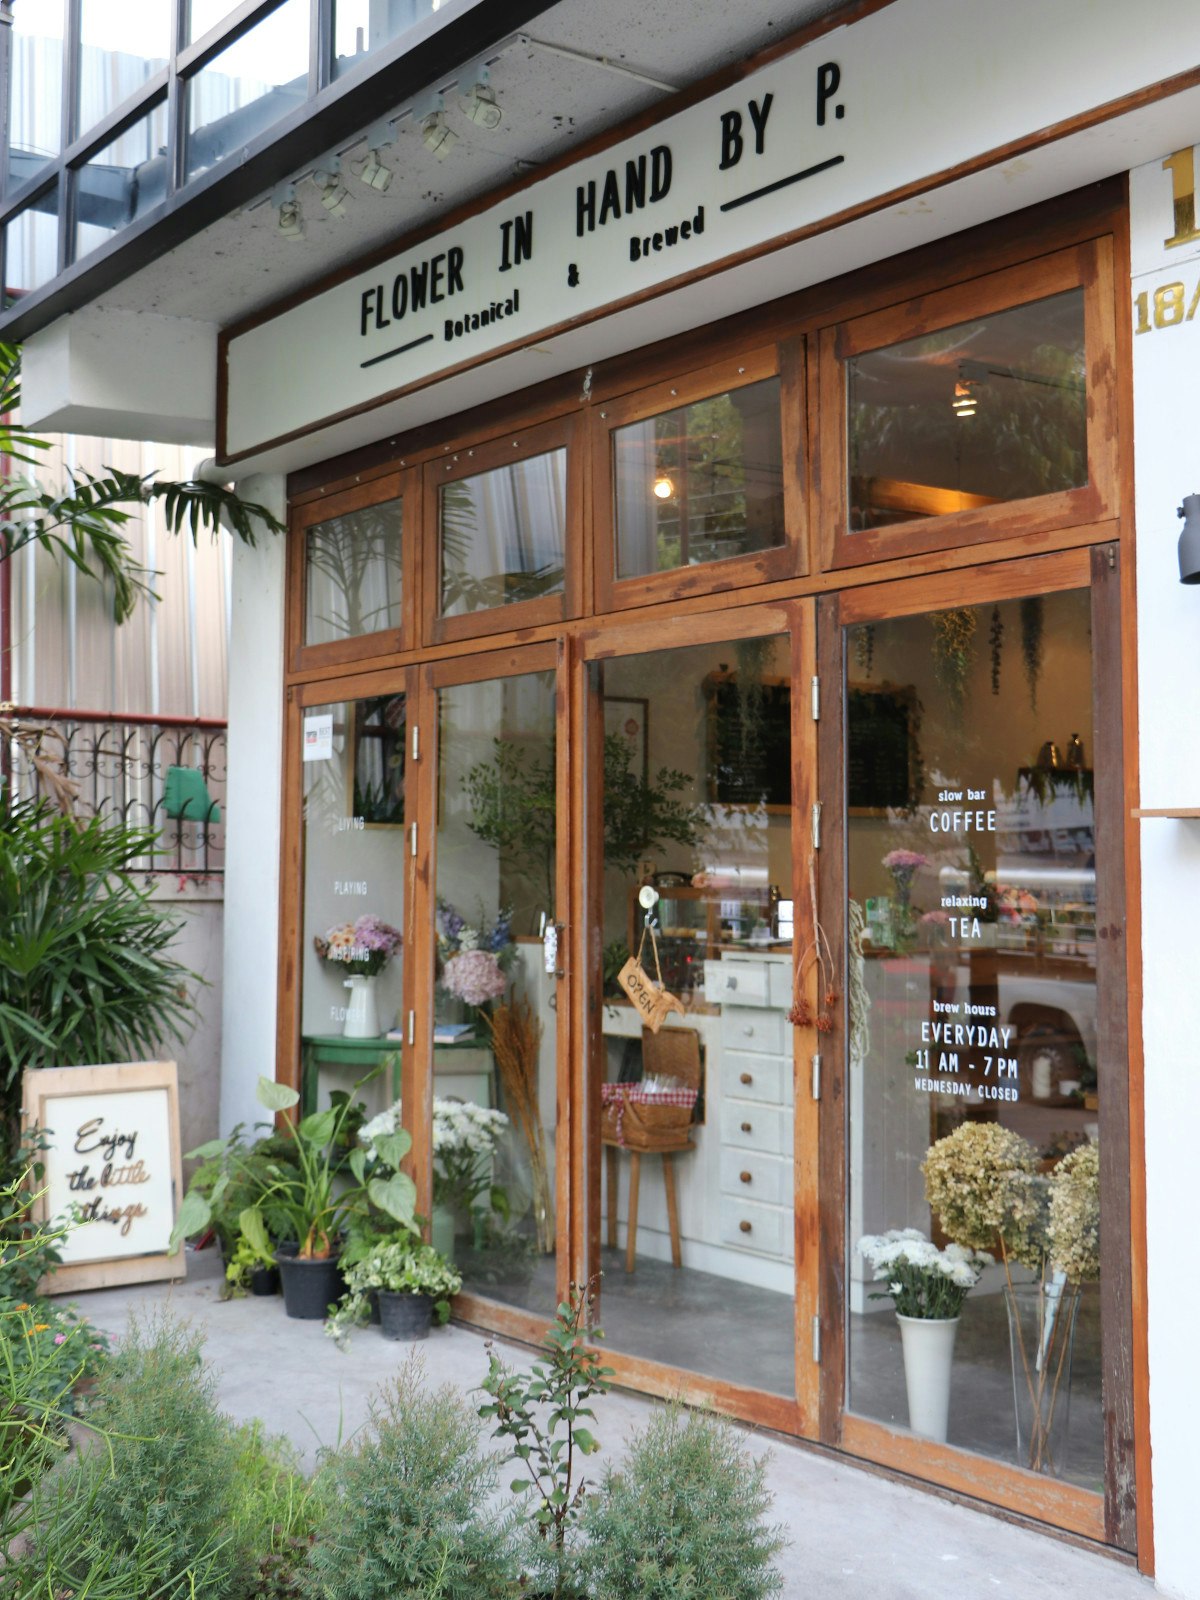 Entrance to Flower in hand by P florist and cake cafe in Ari district